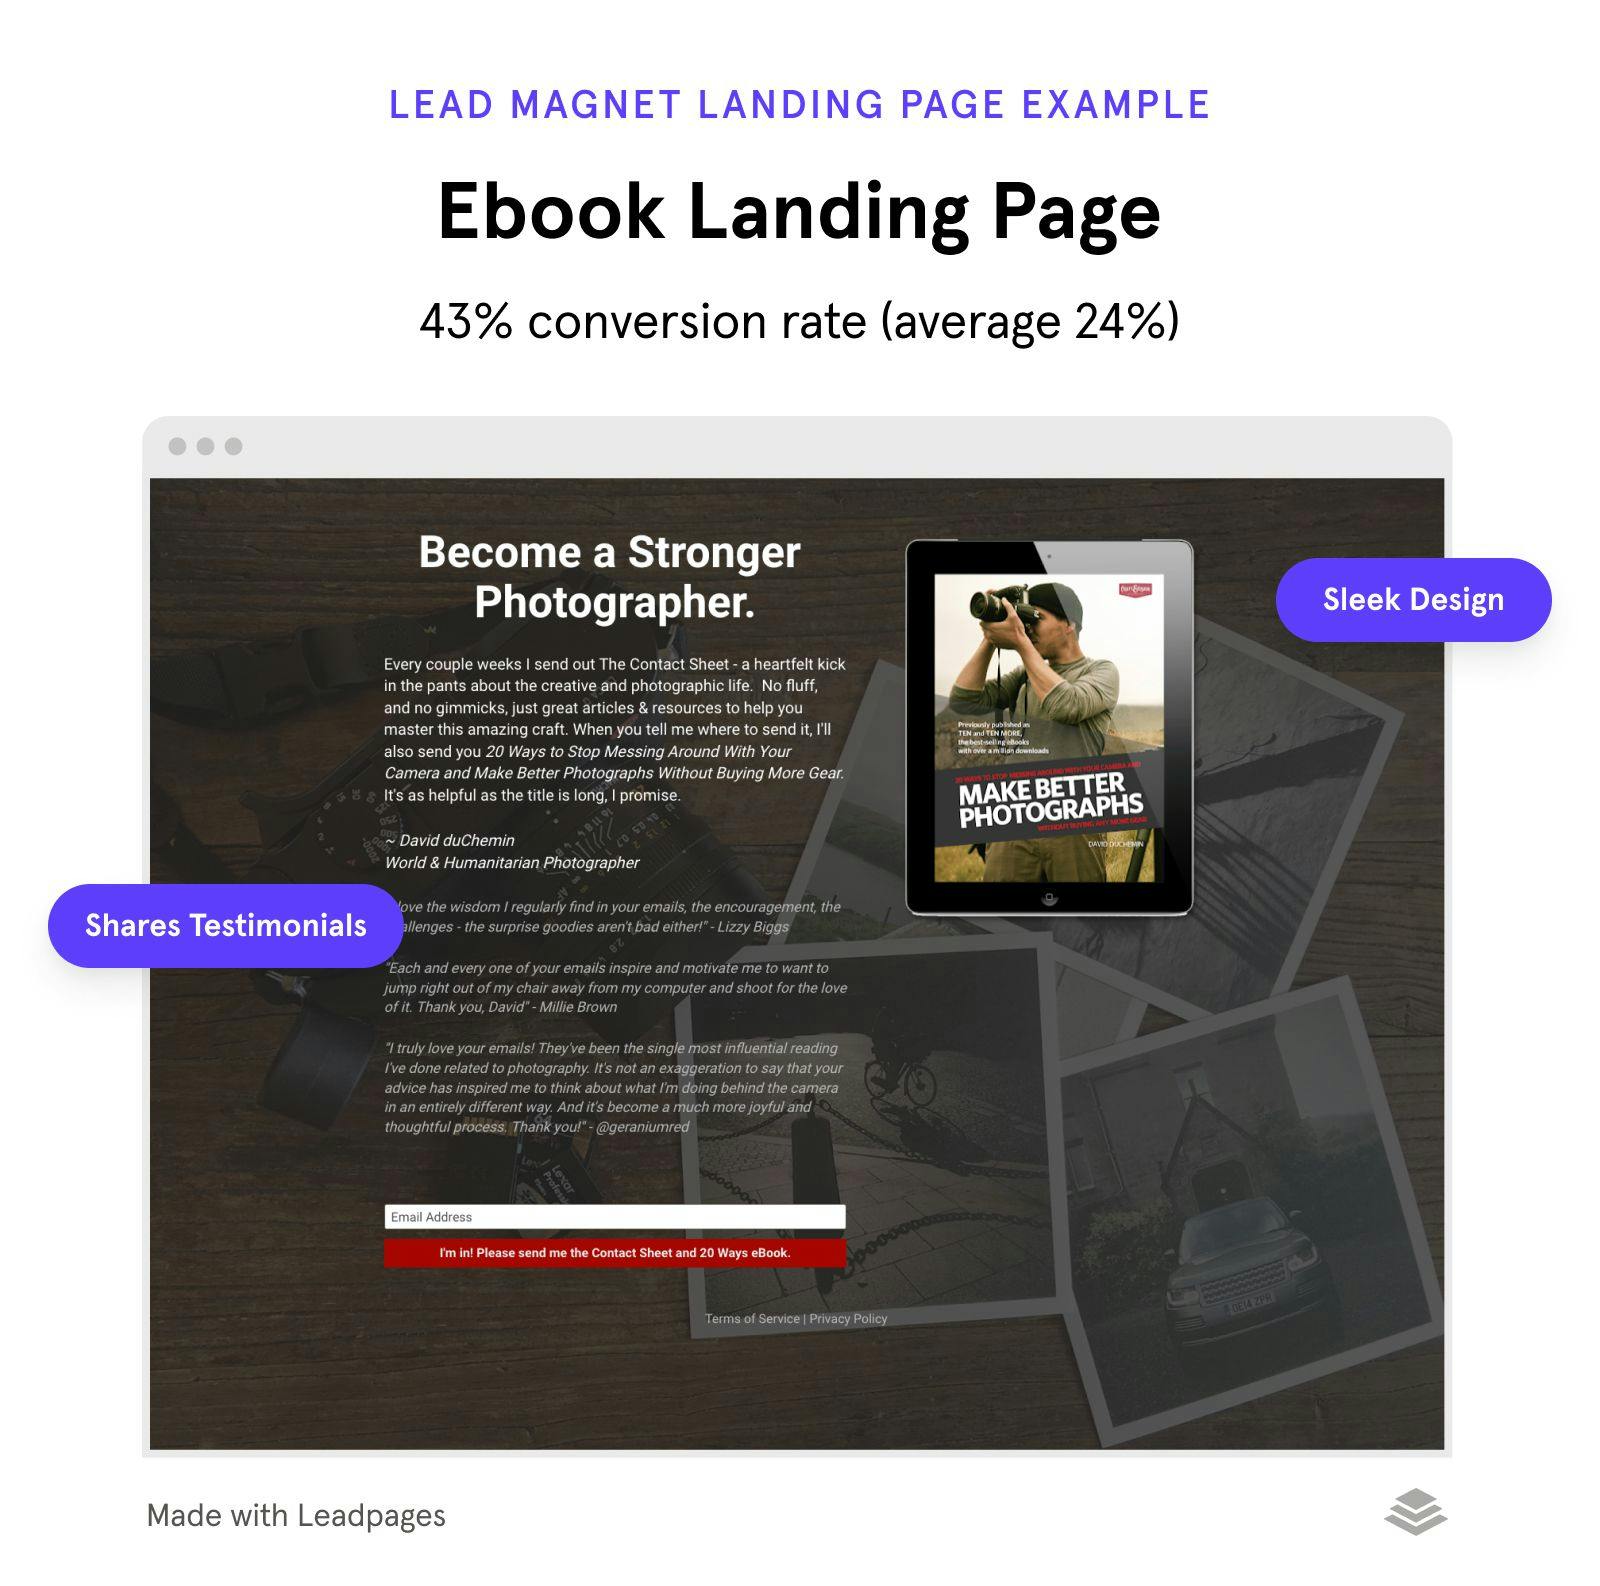 Ebook lead magnet landing page example